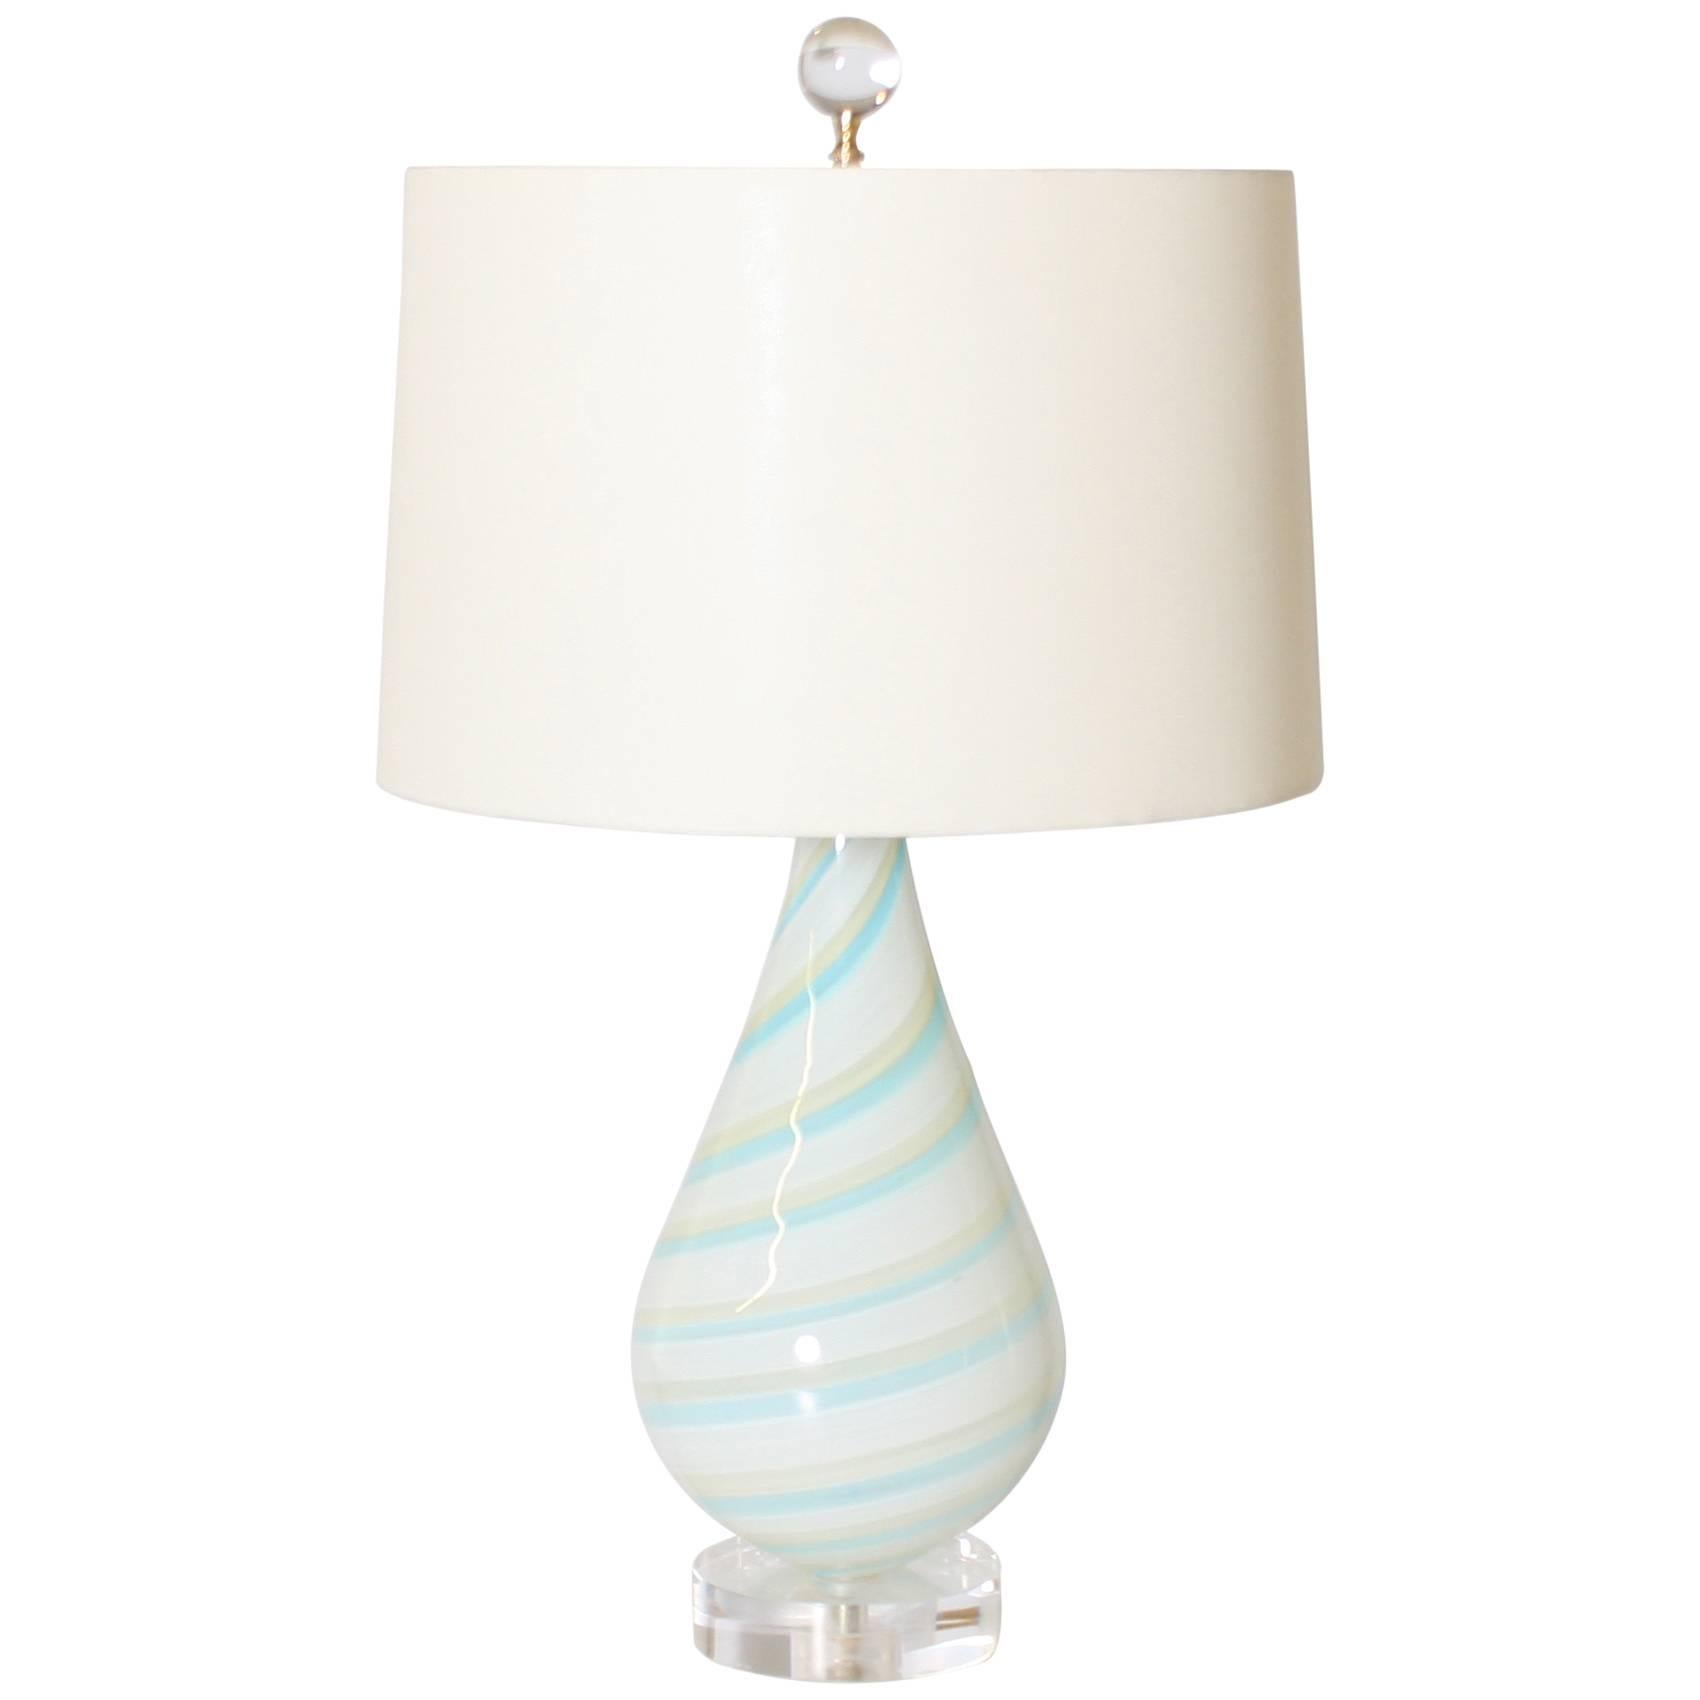 Blue and Ivory Striped Murano Lamp, circa 2000